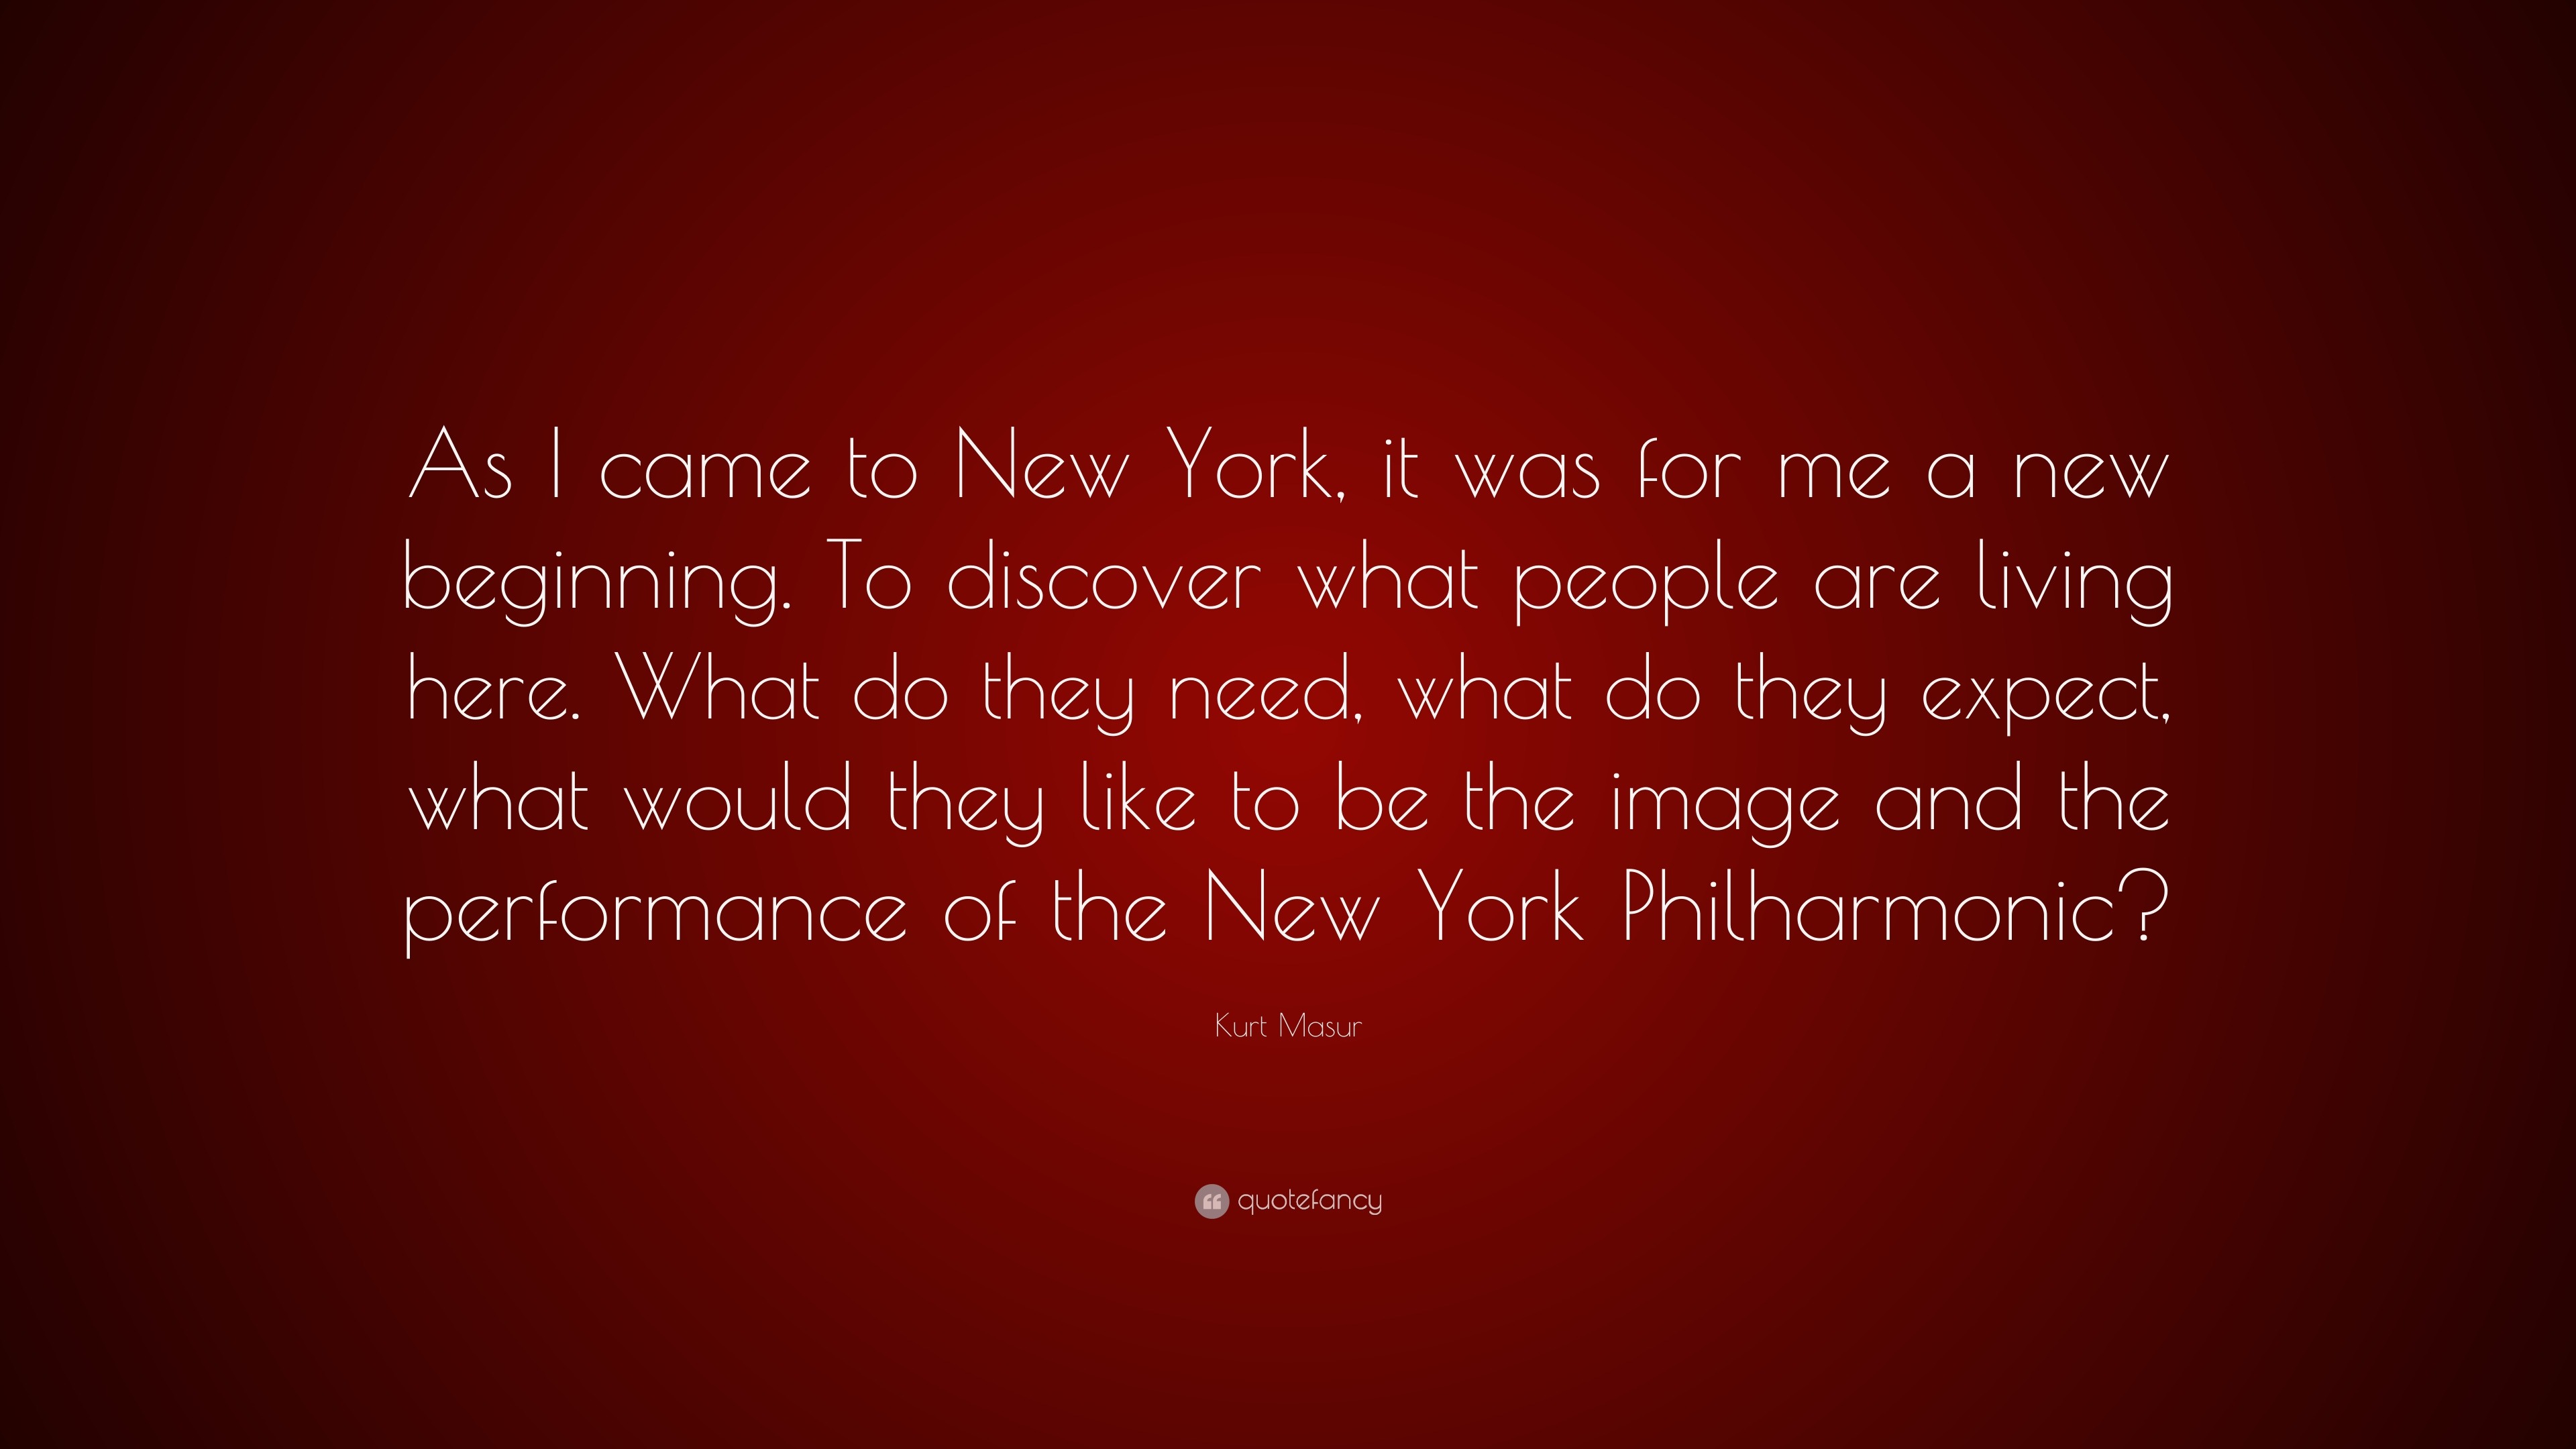 Kurt Masur Quote: “As I came to New York, it was for me a new beginning ...